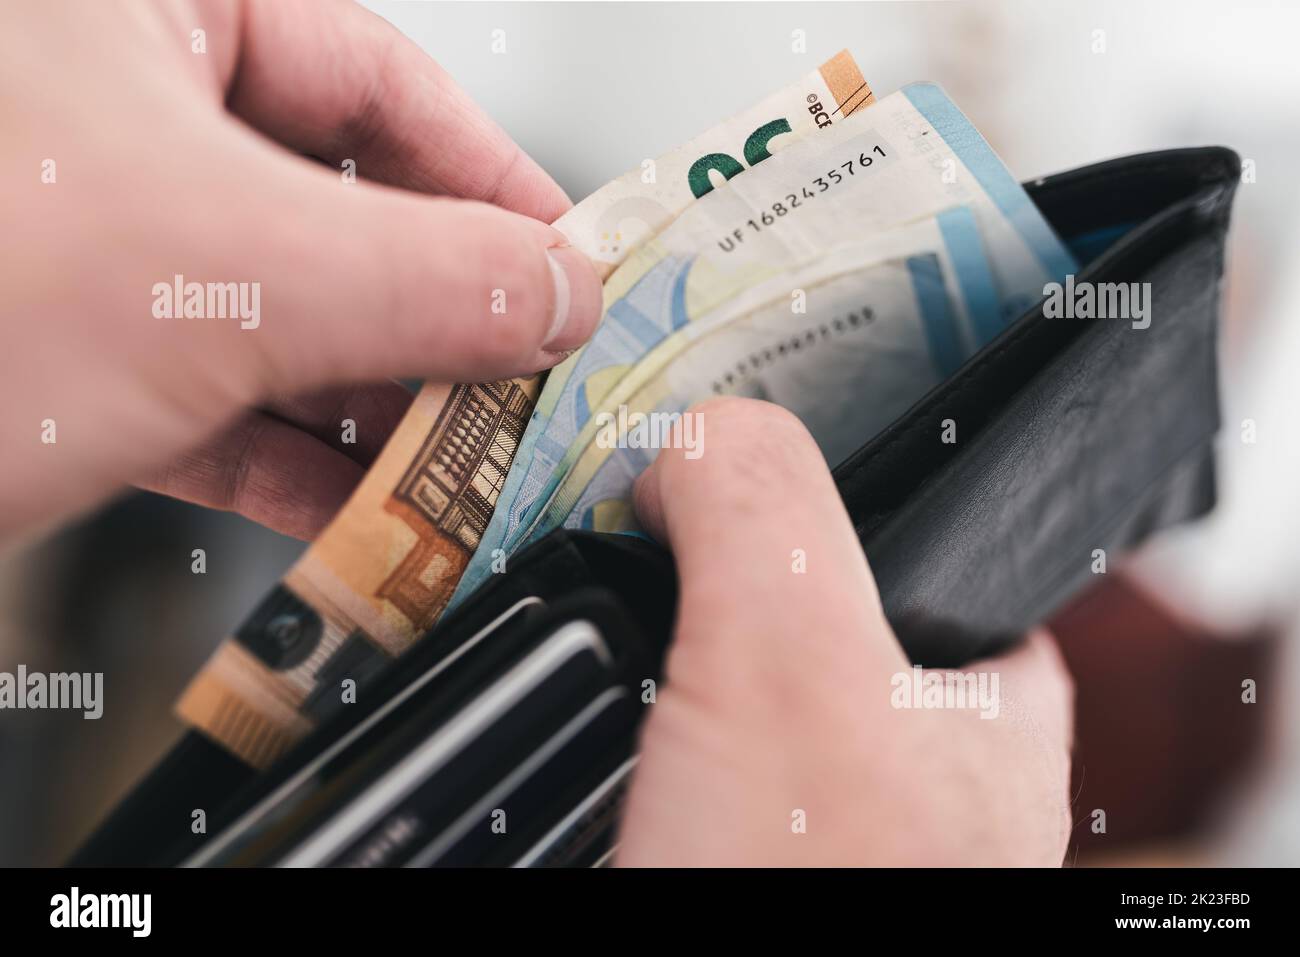 close-up view of hands taking money out of a wallet, spending cash concept Stock Photo